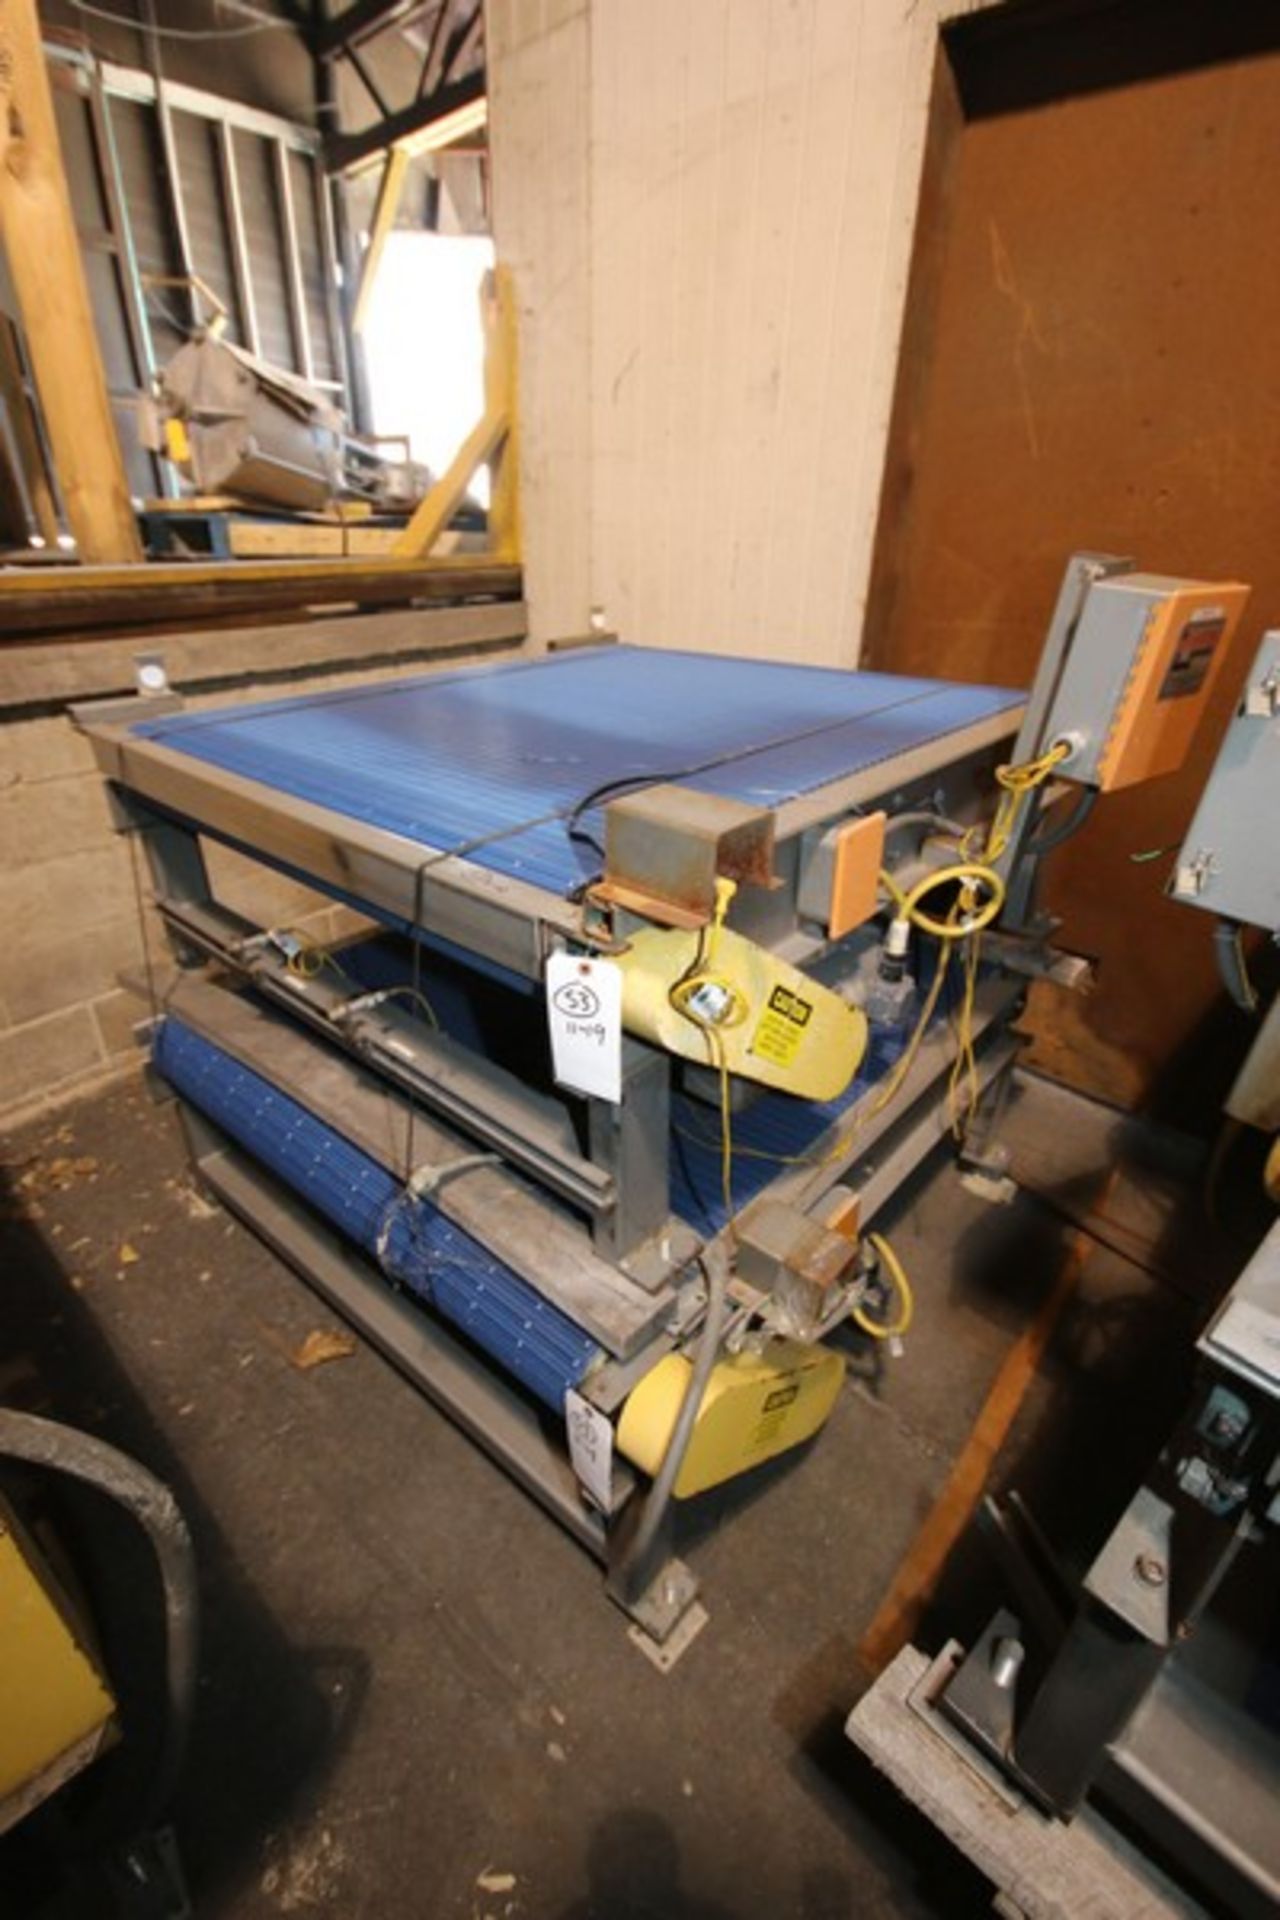 6-Sections of H&CS Conveyors, Overall Dims.: Aprox. 60" L x 64" W x 36" H, with Plastic Blue Belt,